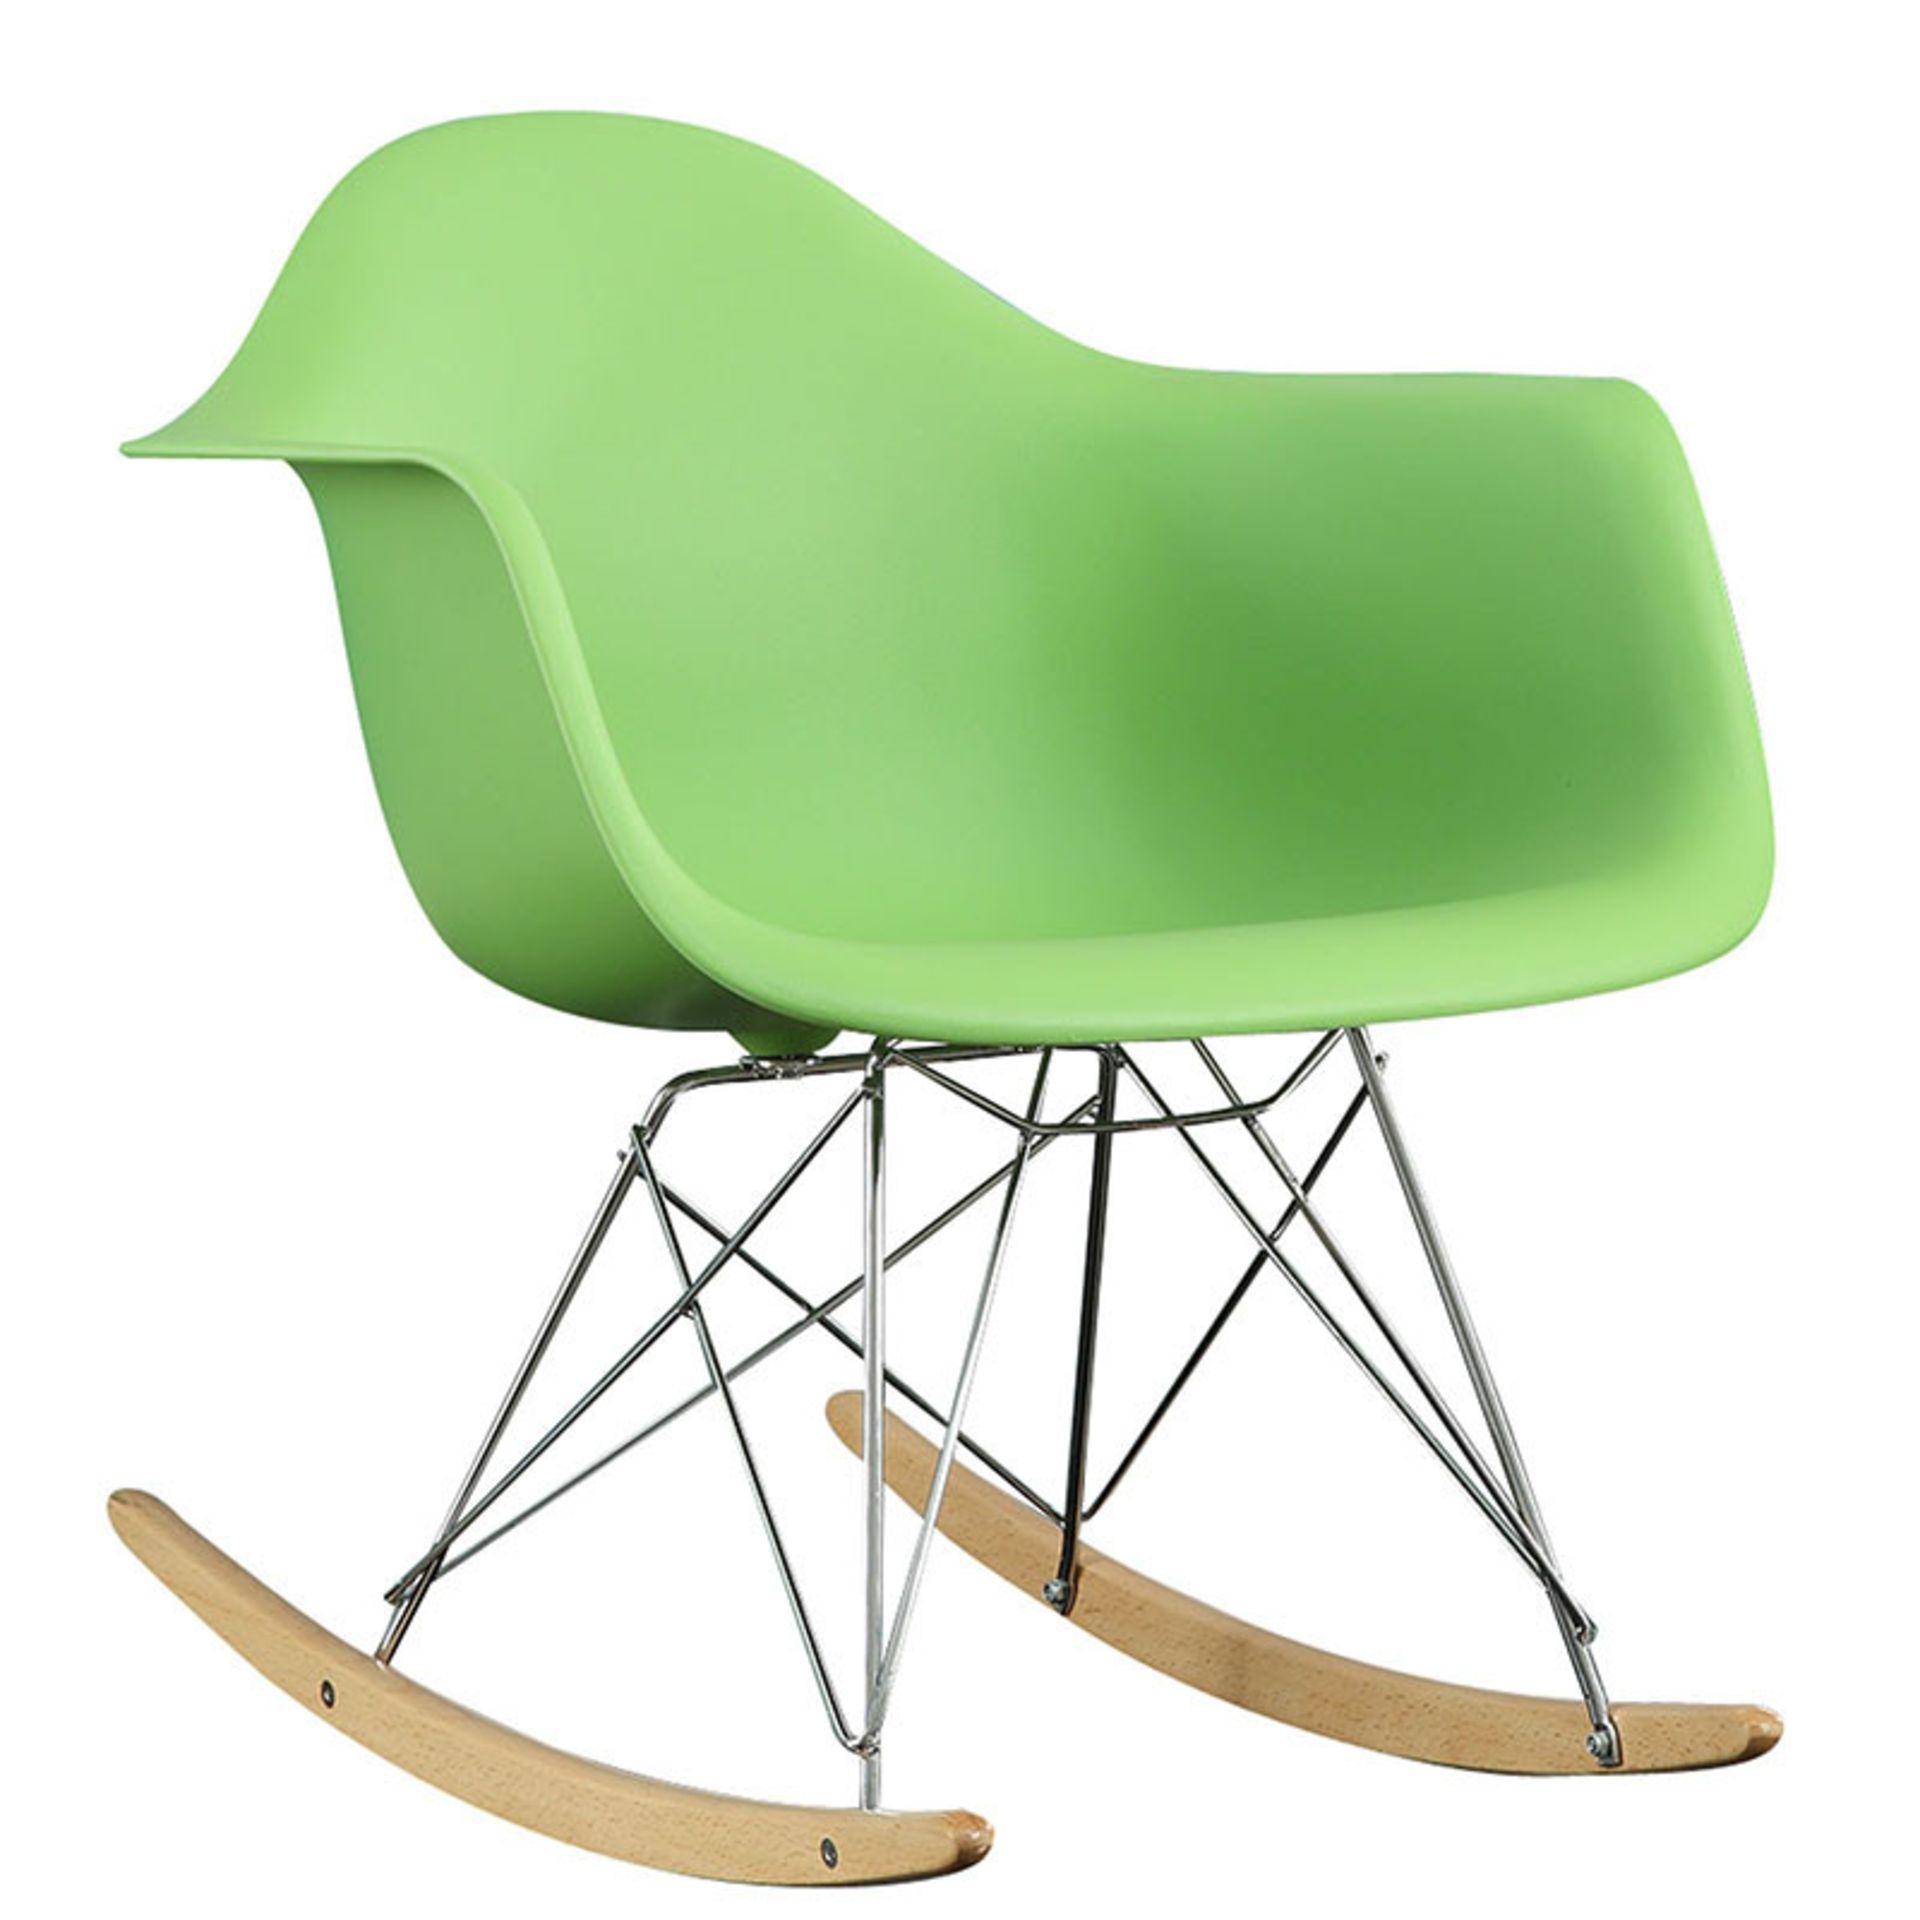 X1 BOXED BRAND NEW, EAMES STYLE ROCKER ARM CHAIR, GREEN, RRP-£149.99 (MD-CHAIR)